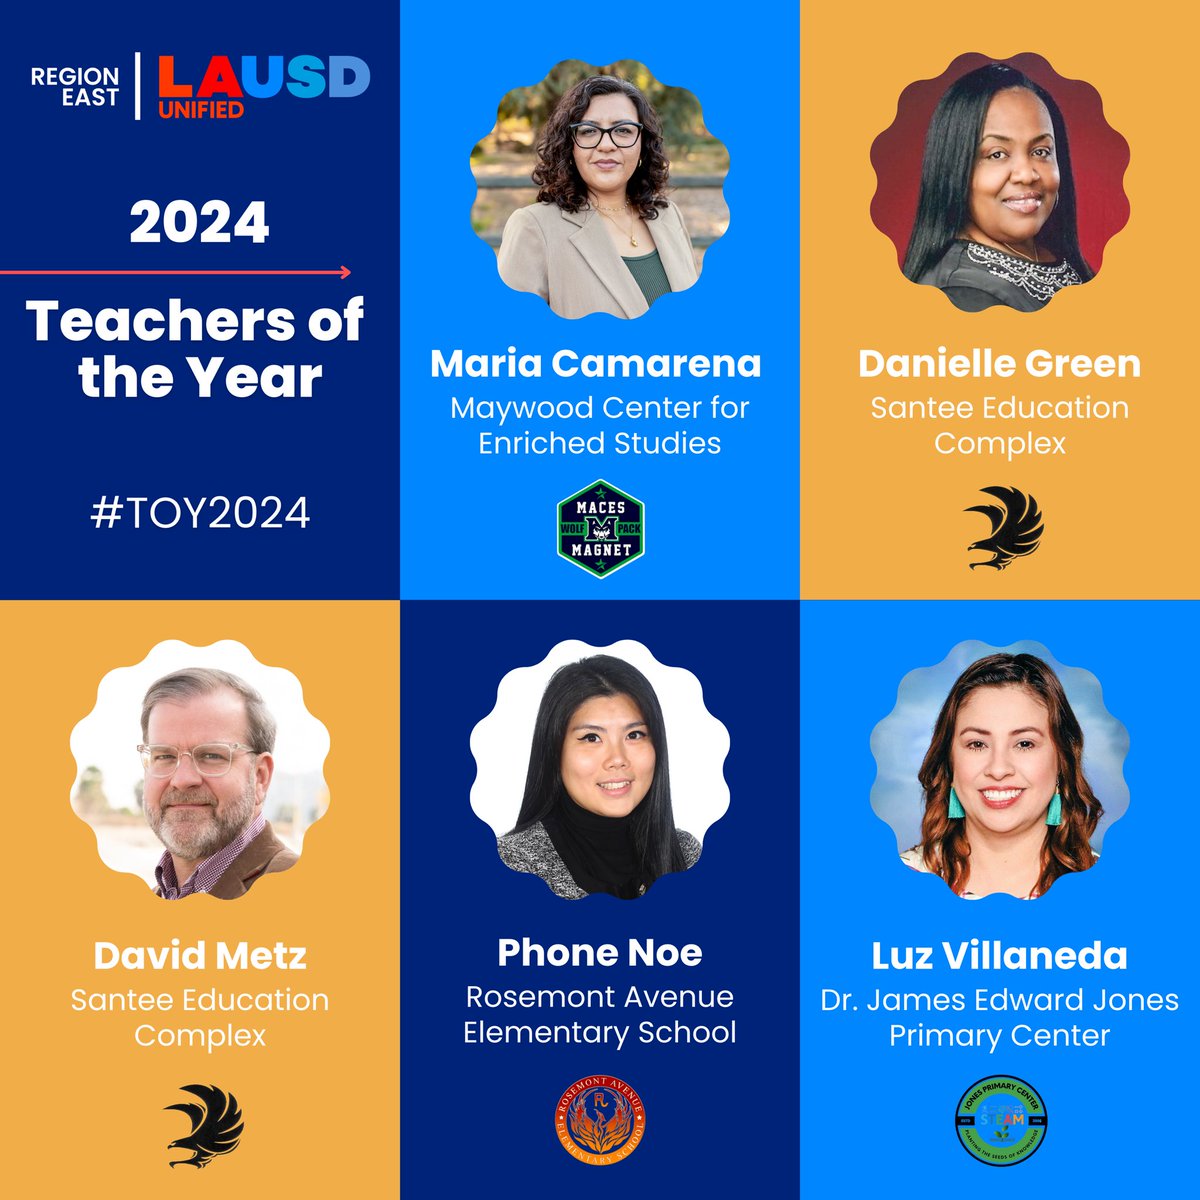 🎉 Congratulations to @LASchools 2024 Teachers of the Year, especially our 5 incredible educators in Region East! Thank you for your commitment to our students and for nurturing the next generation of leaders.